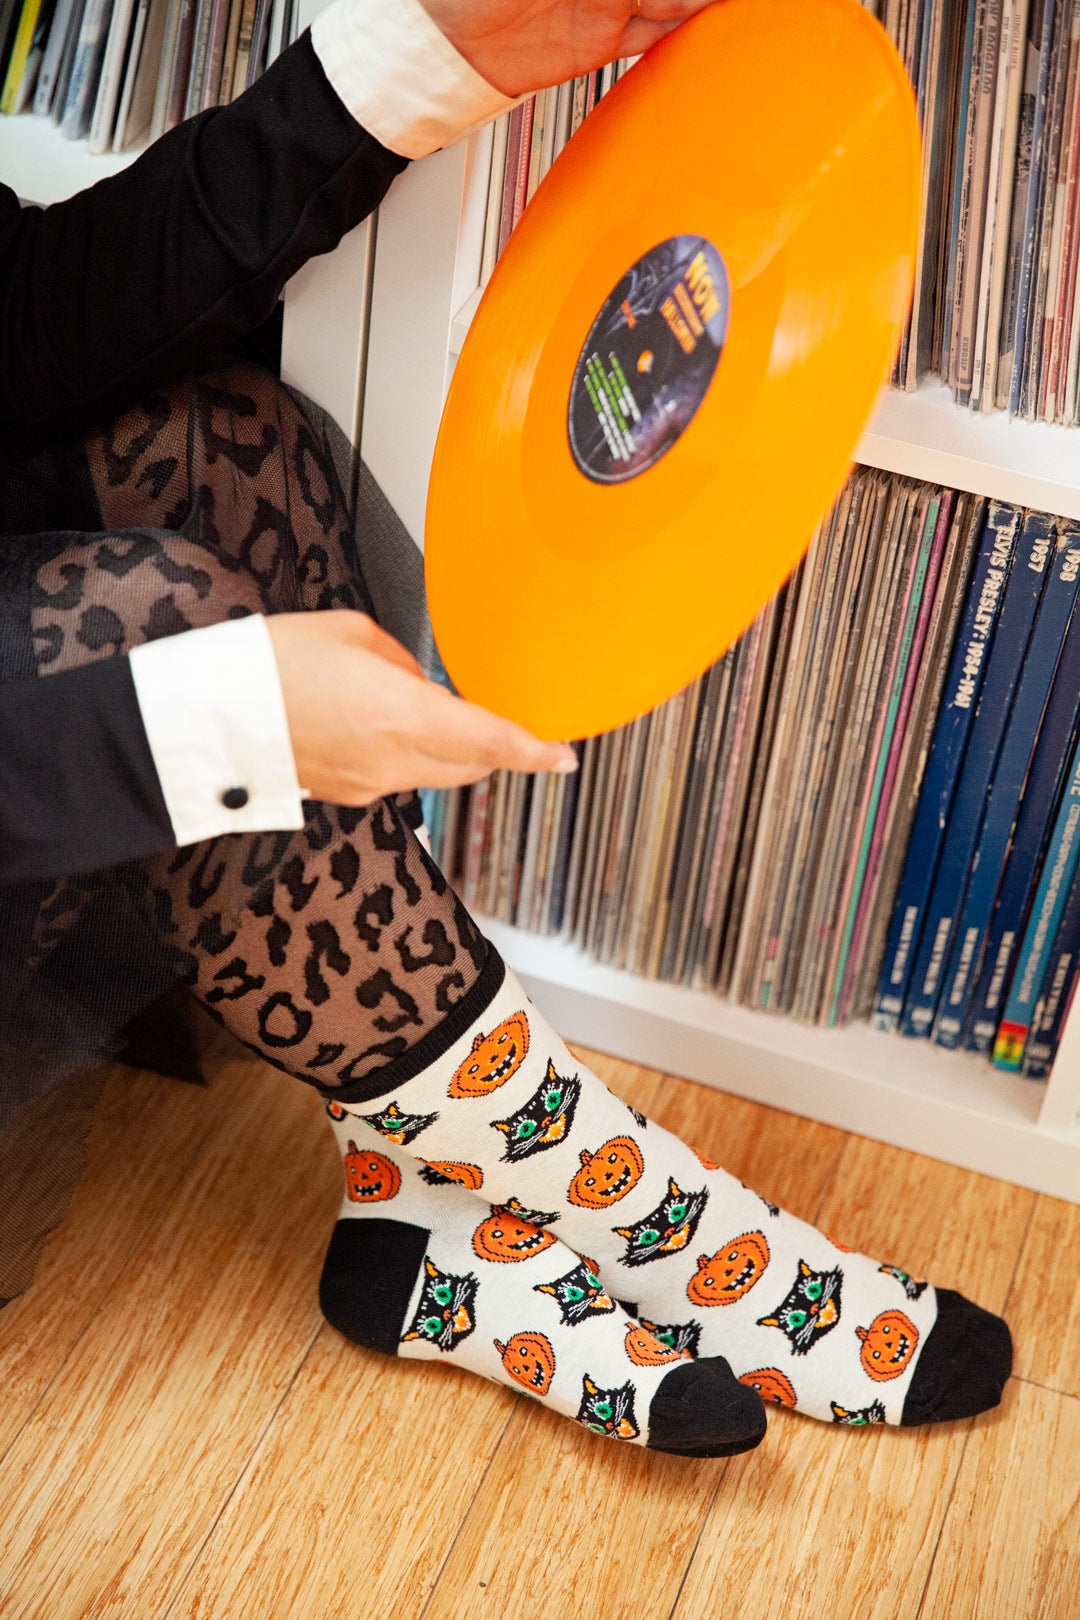 A fashionable person wears a black dress with white cuffs, black tights with a leopard print texture and vintage-inspired Halloween socks with retro cats and jack-o-lanterns